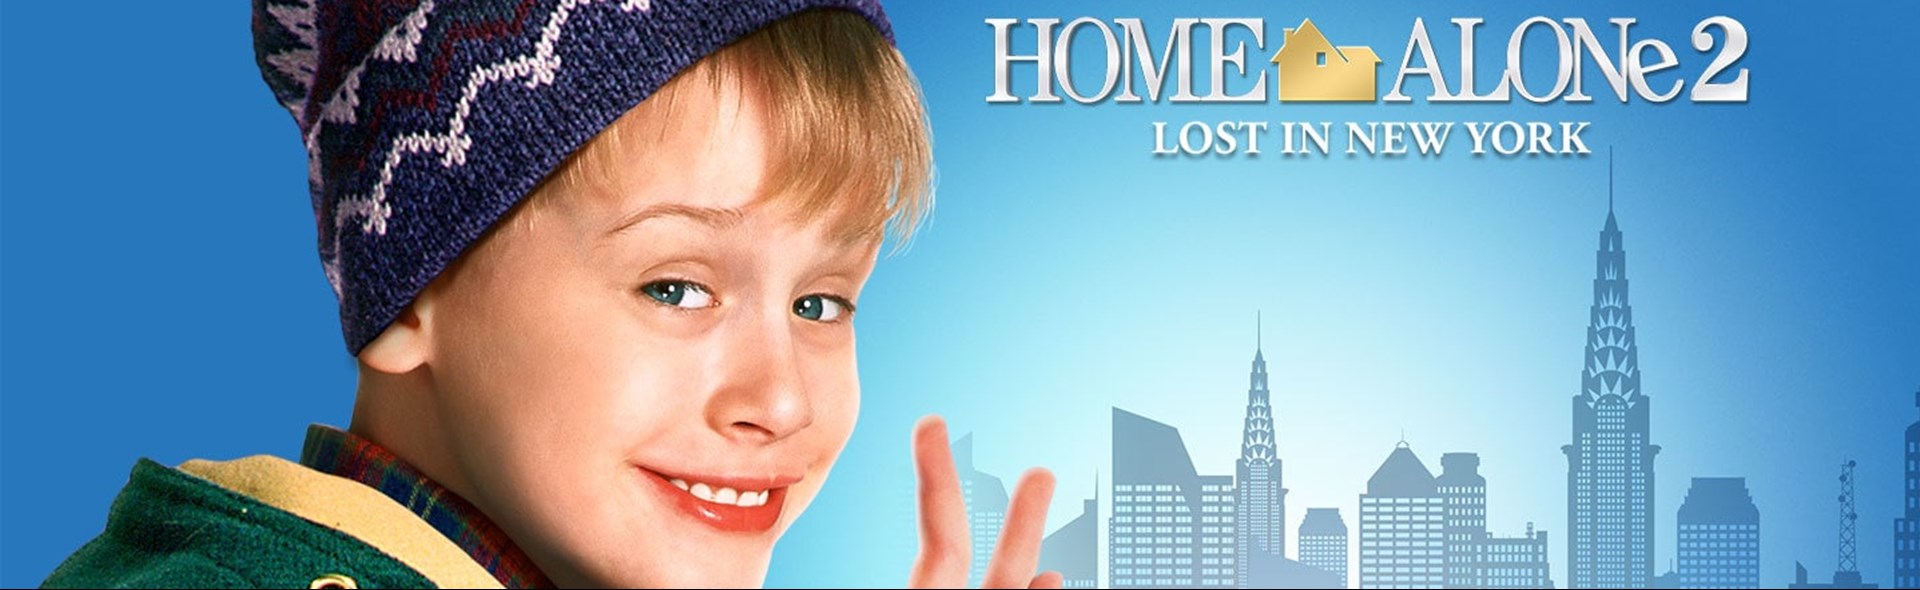 Home Alone 2: Lost In New York 4K